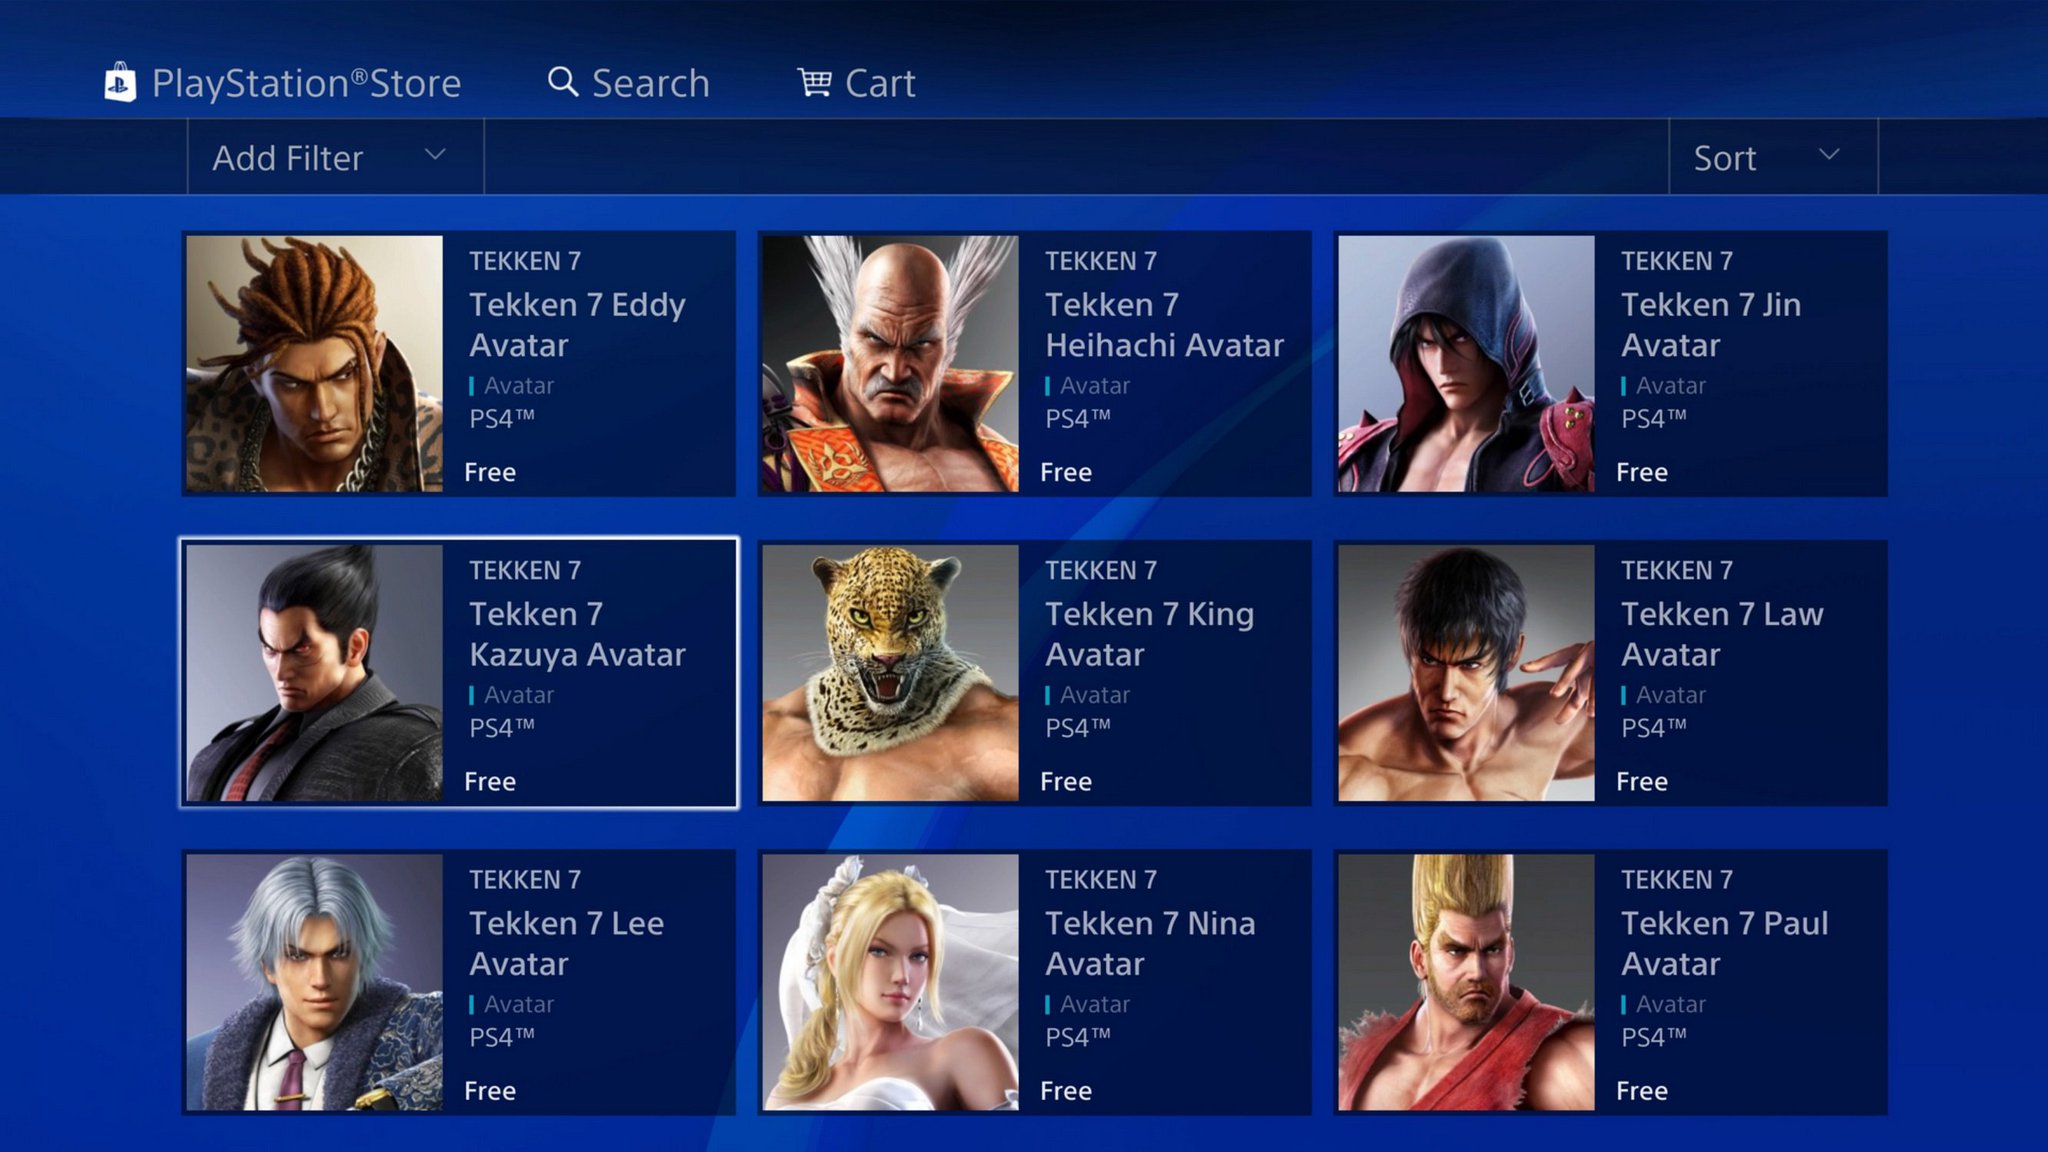 TEKKEN on Get Tekken 7 avatars on PSN today! Only part of the is currently available but all are coming in the future. https://t.co/65hbcgy1wd" / Twitter